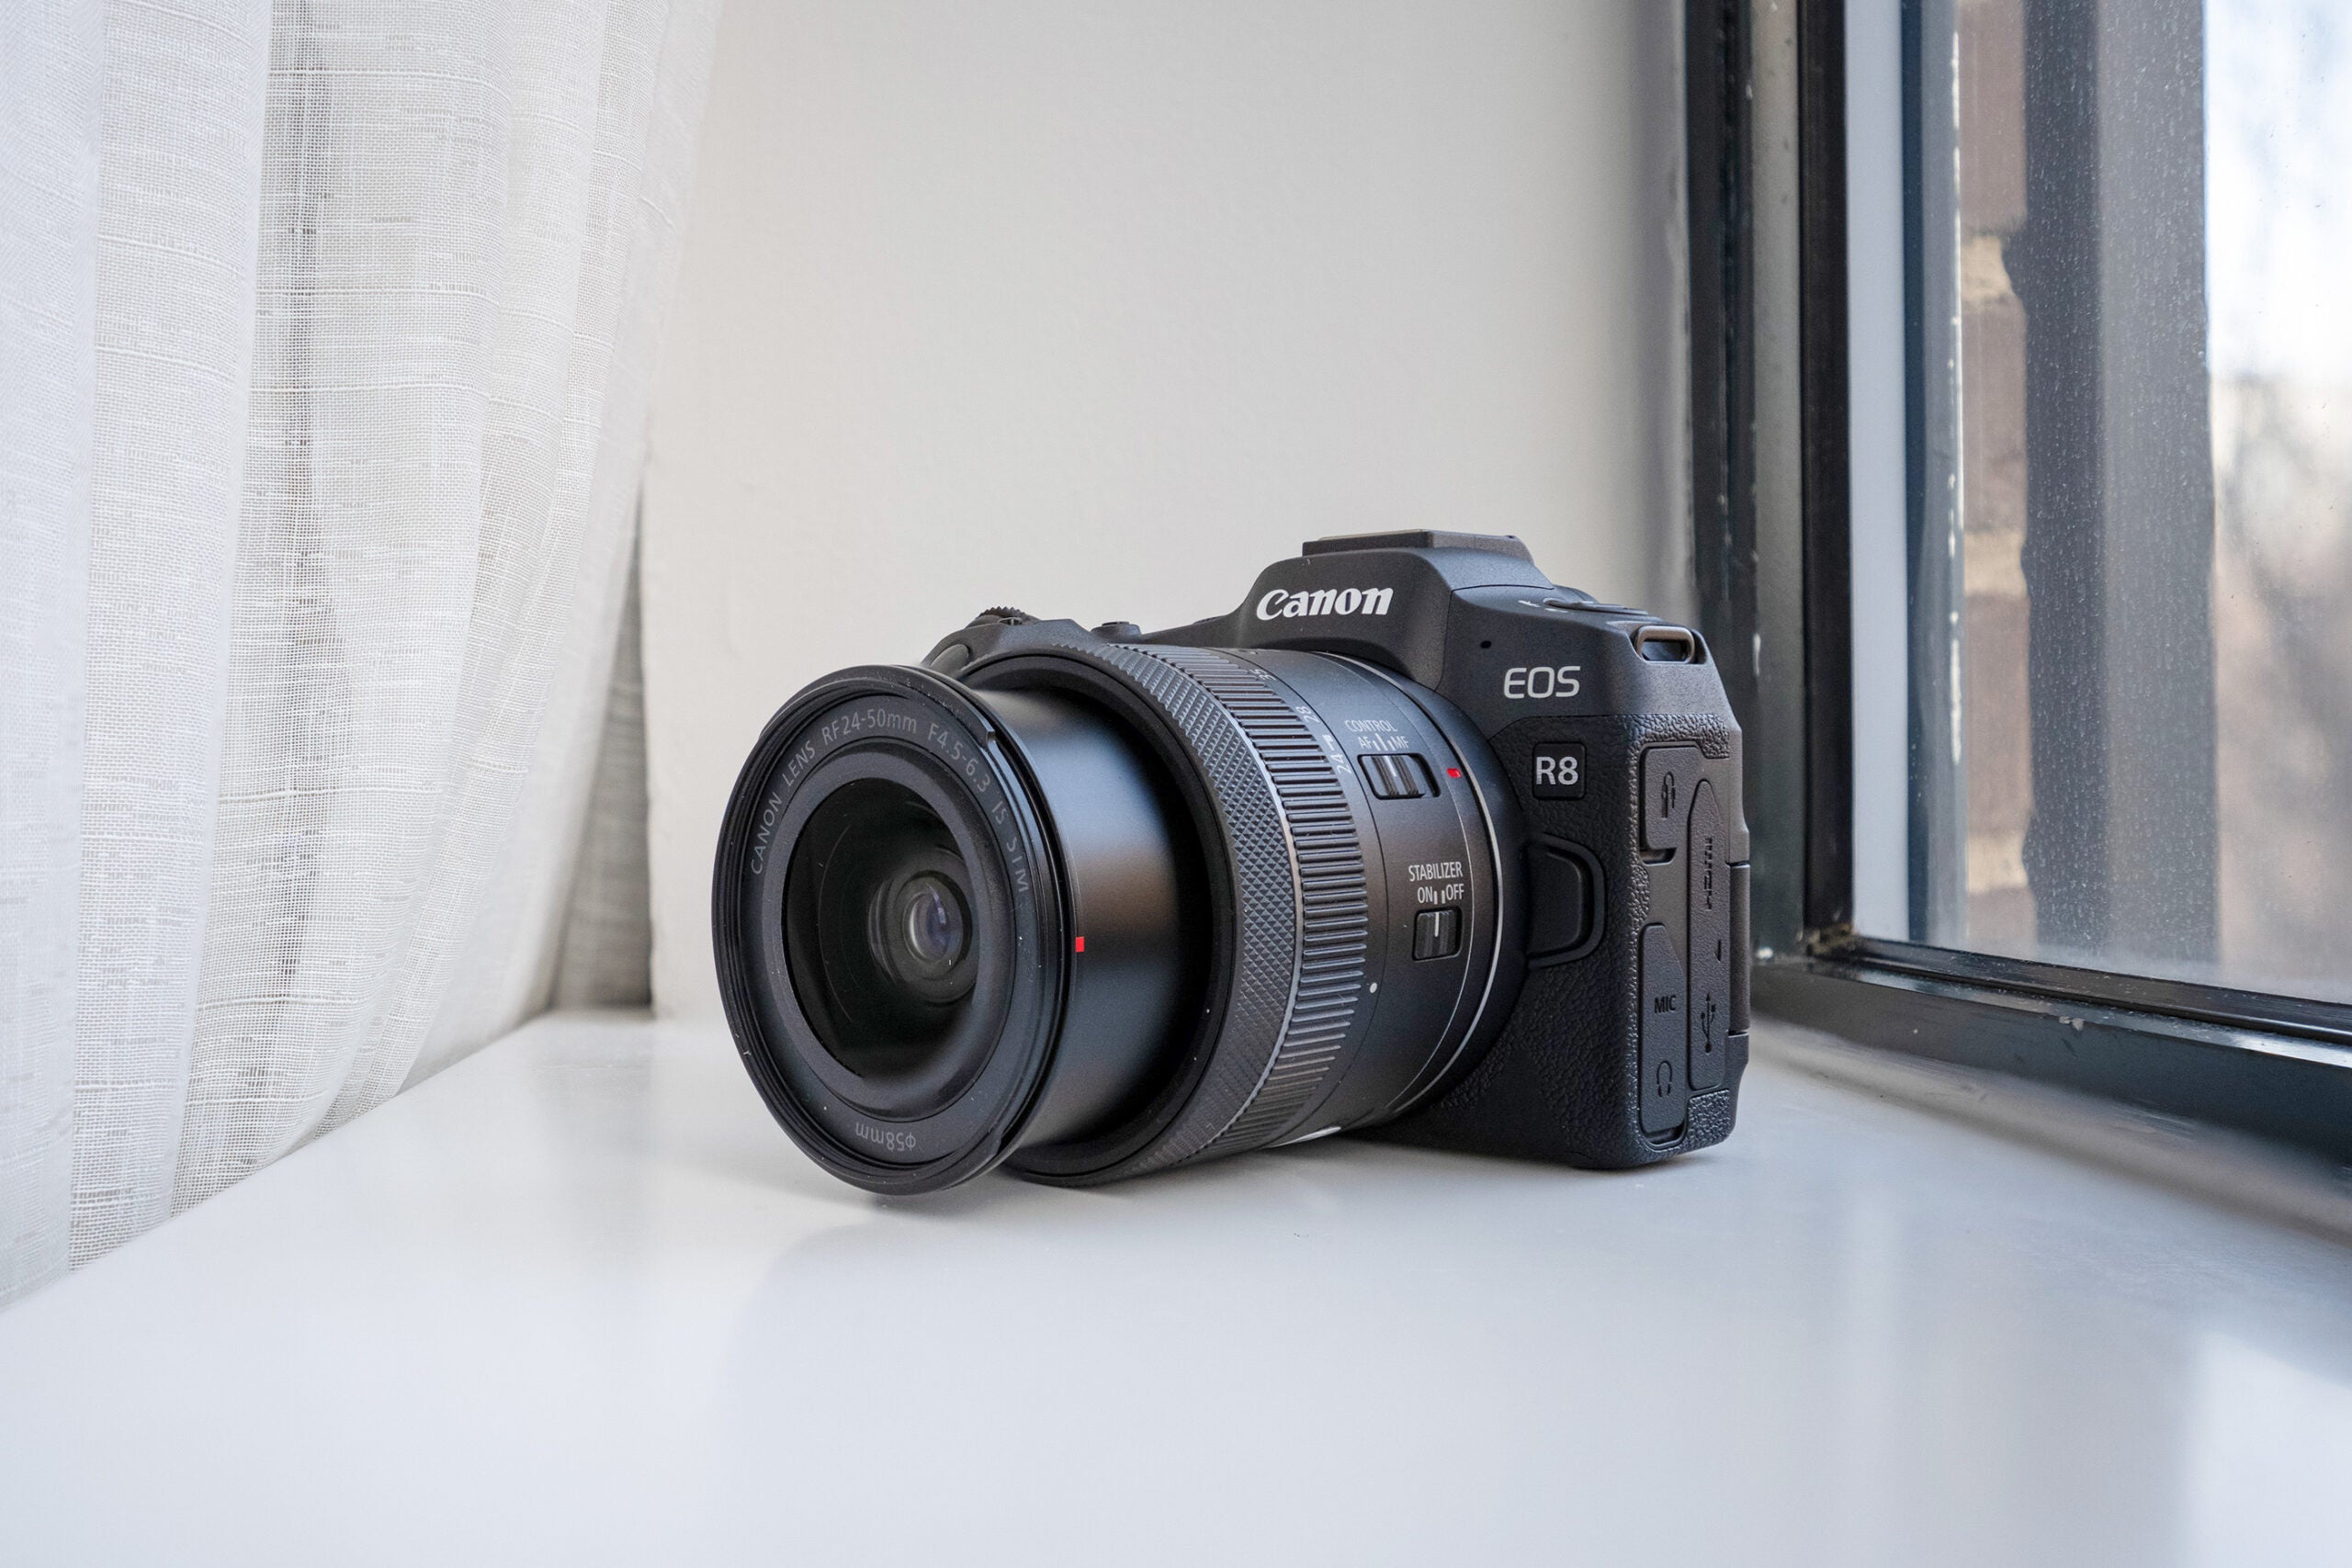 Early hands-on with the Canon EOS R8: A compact hybrid camera for beginners